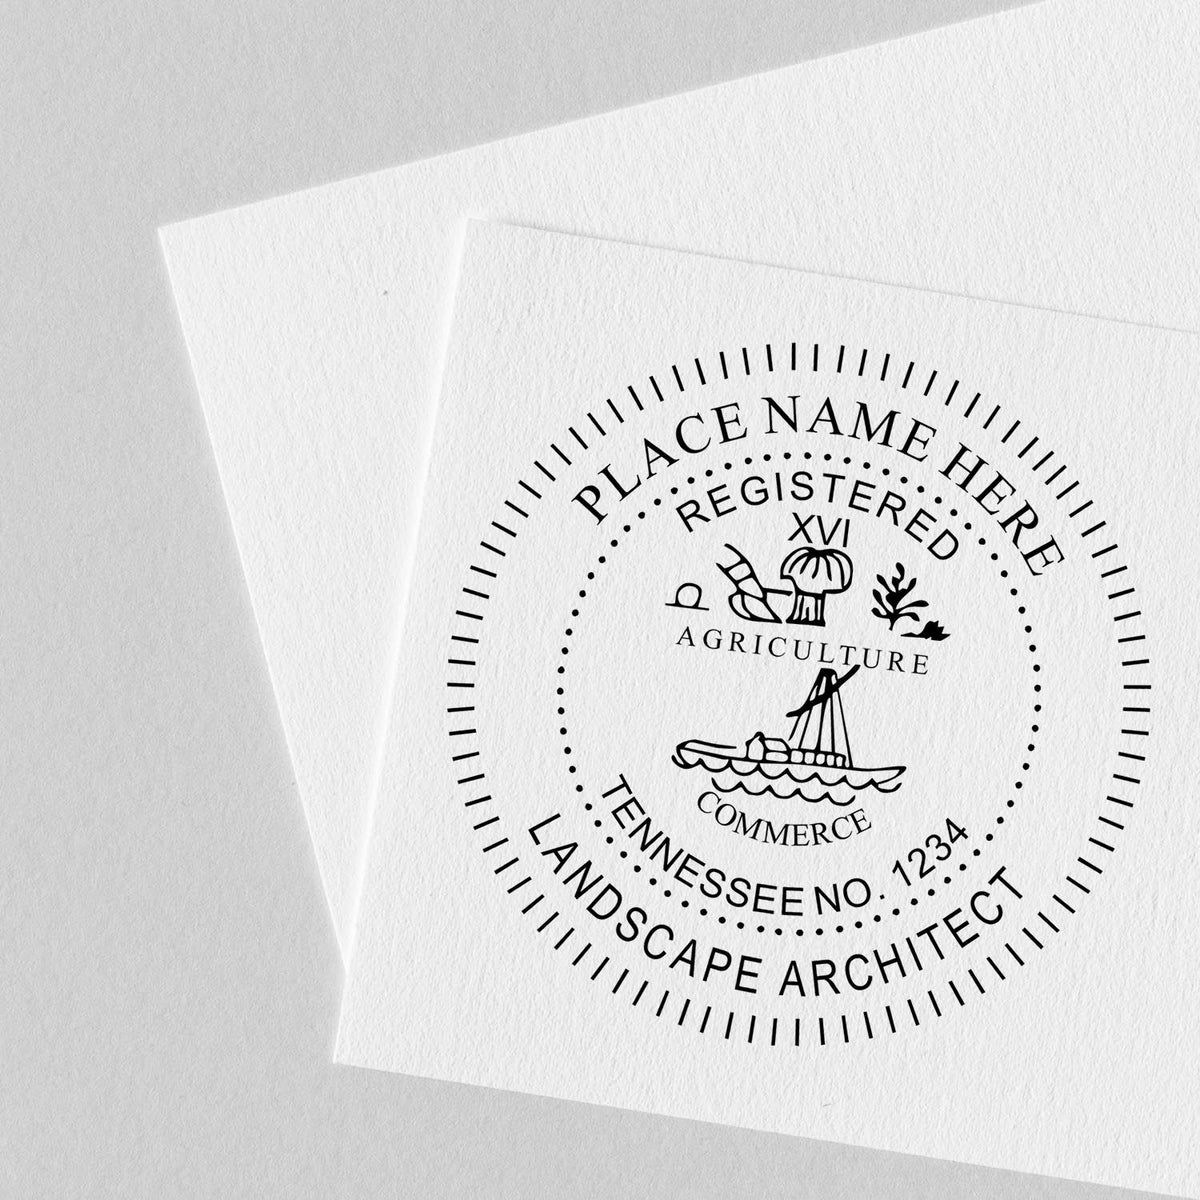 A lifestyle photo showing a stamped image of the Digital Tennessee Landscape Architect Stamp on a piece of paper